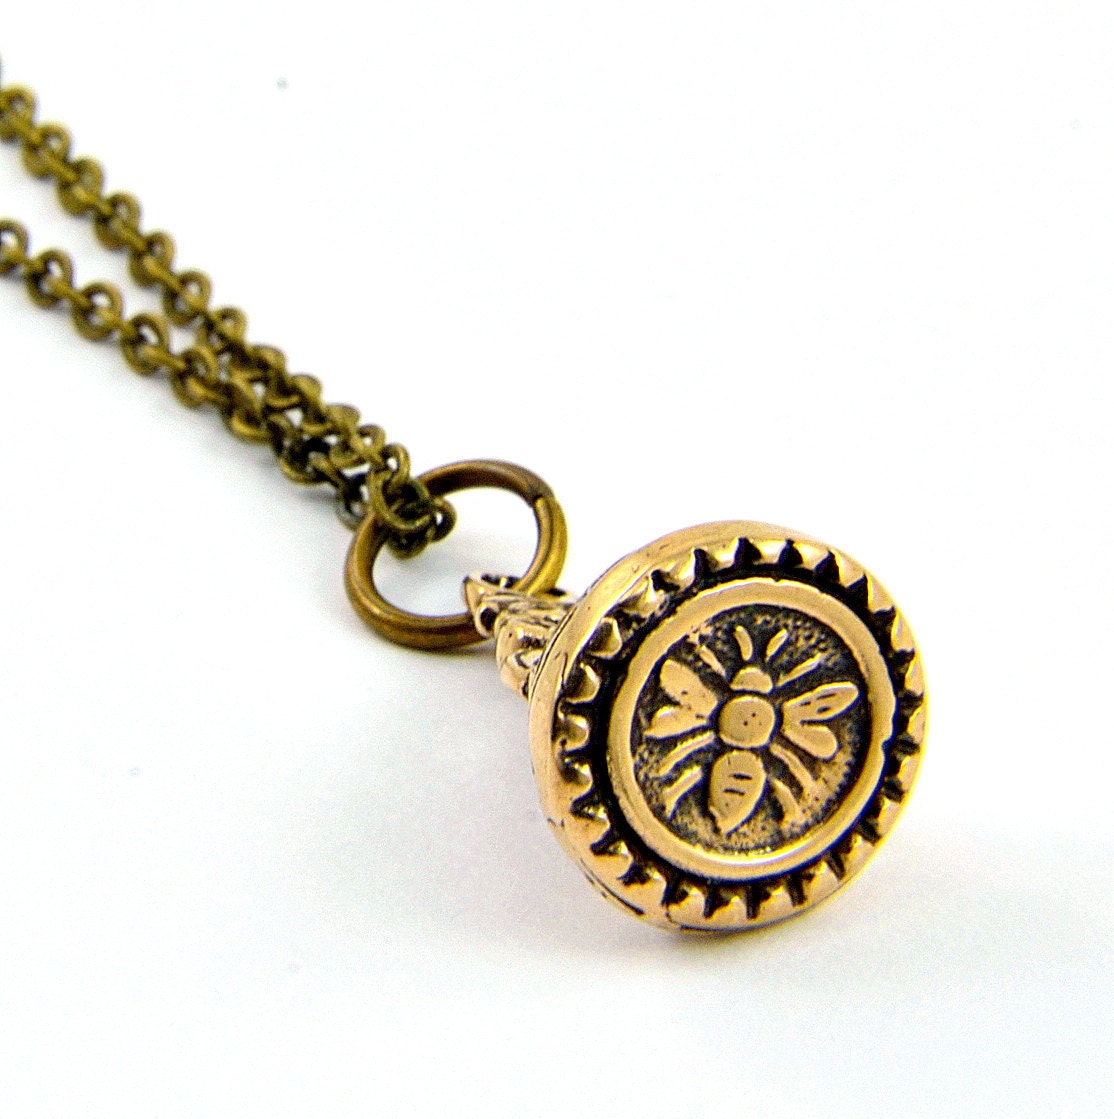 BEE Wax Seal Stamper Necklace by Gwen Delicious Jewelry - Usable Seal Stamp